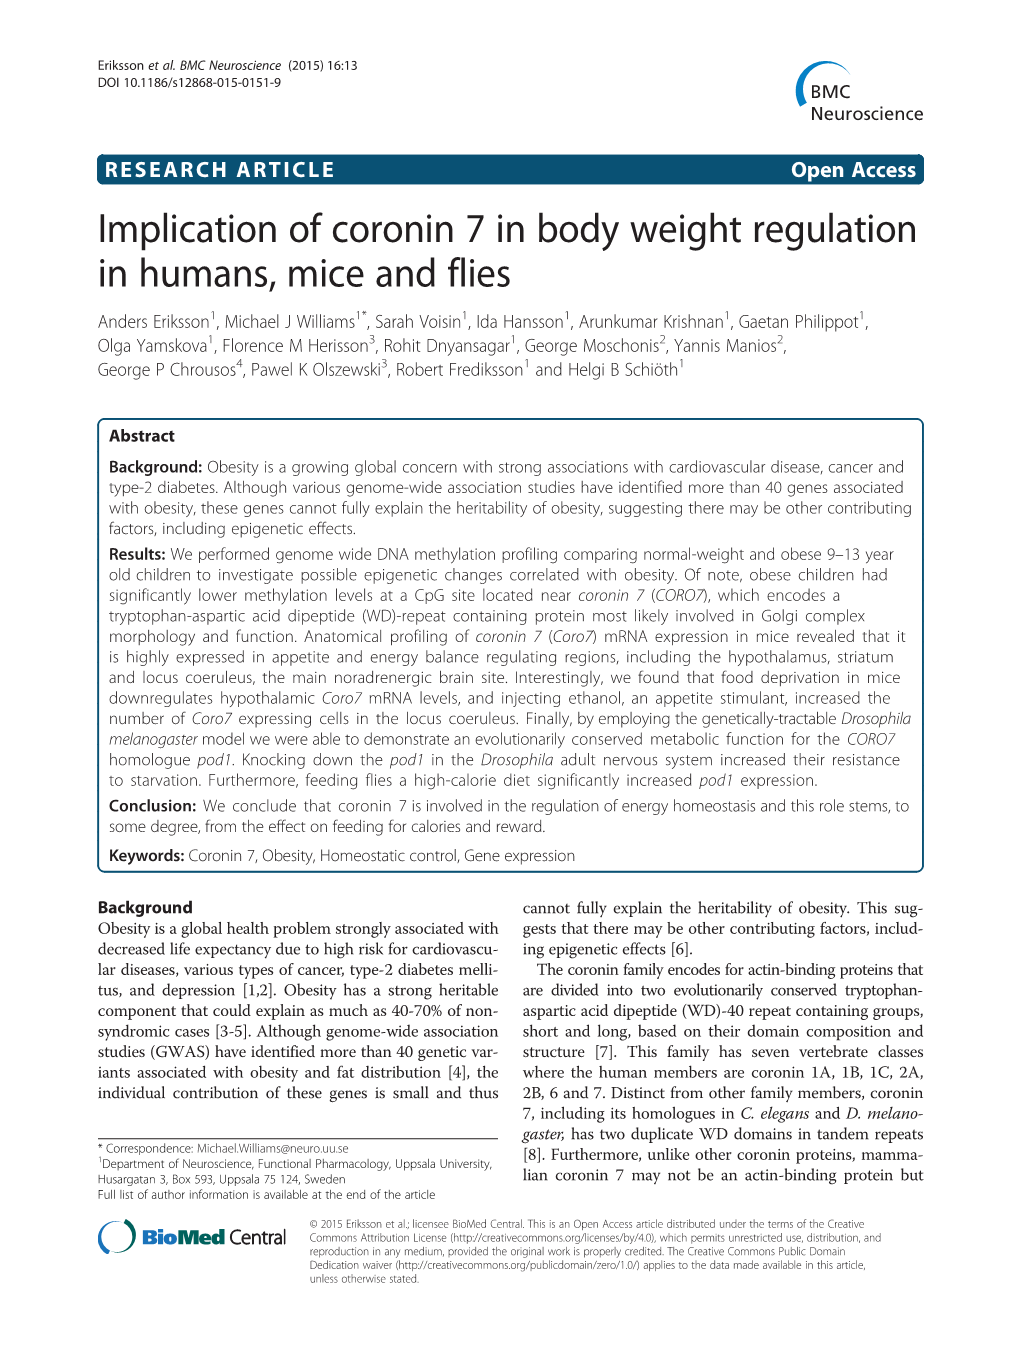 Implication of Coronin 7 in Body Weight Regulation in Humans, Mice and Flies